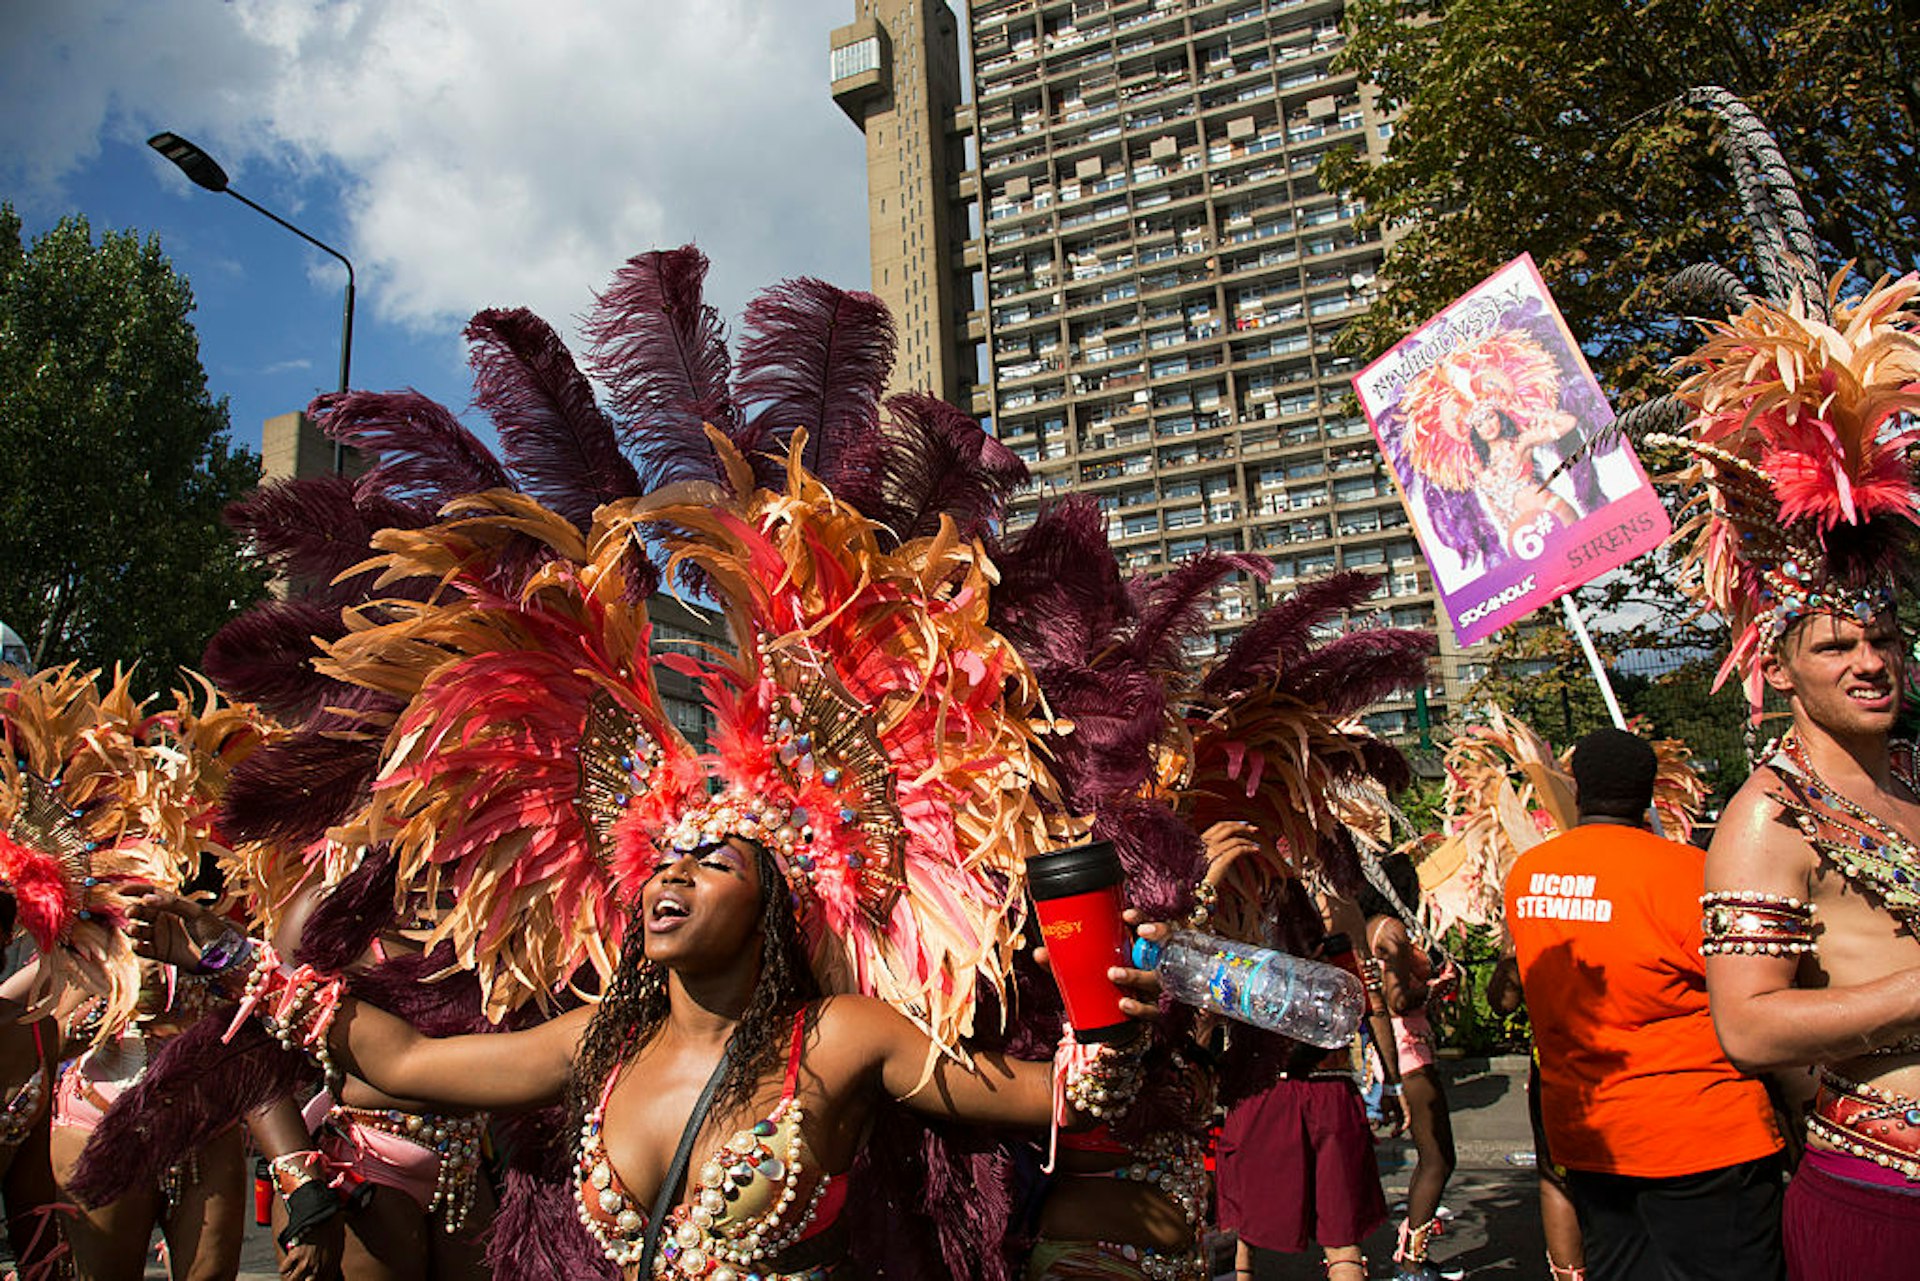 Parade dancers in feather costumes stop in the street at the base of Trellick Tower